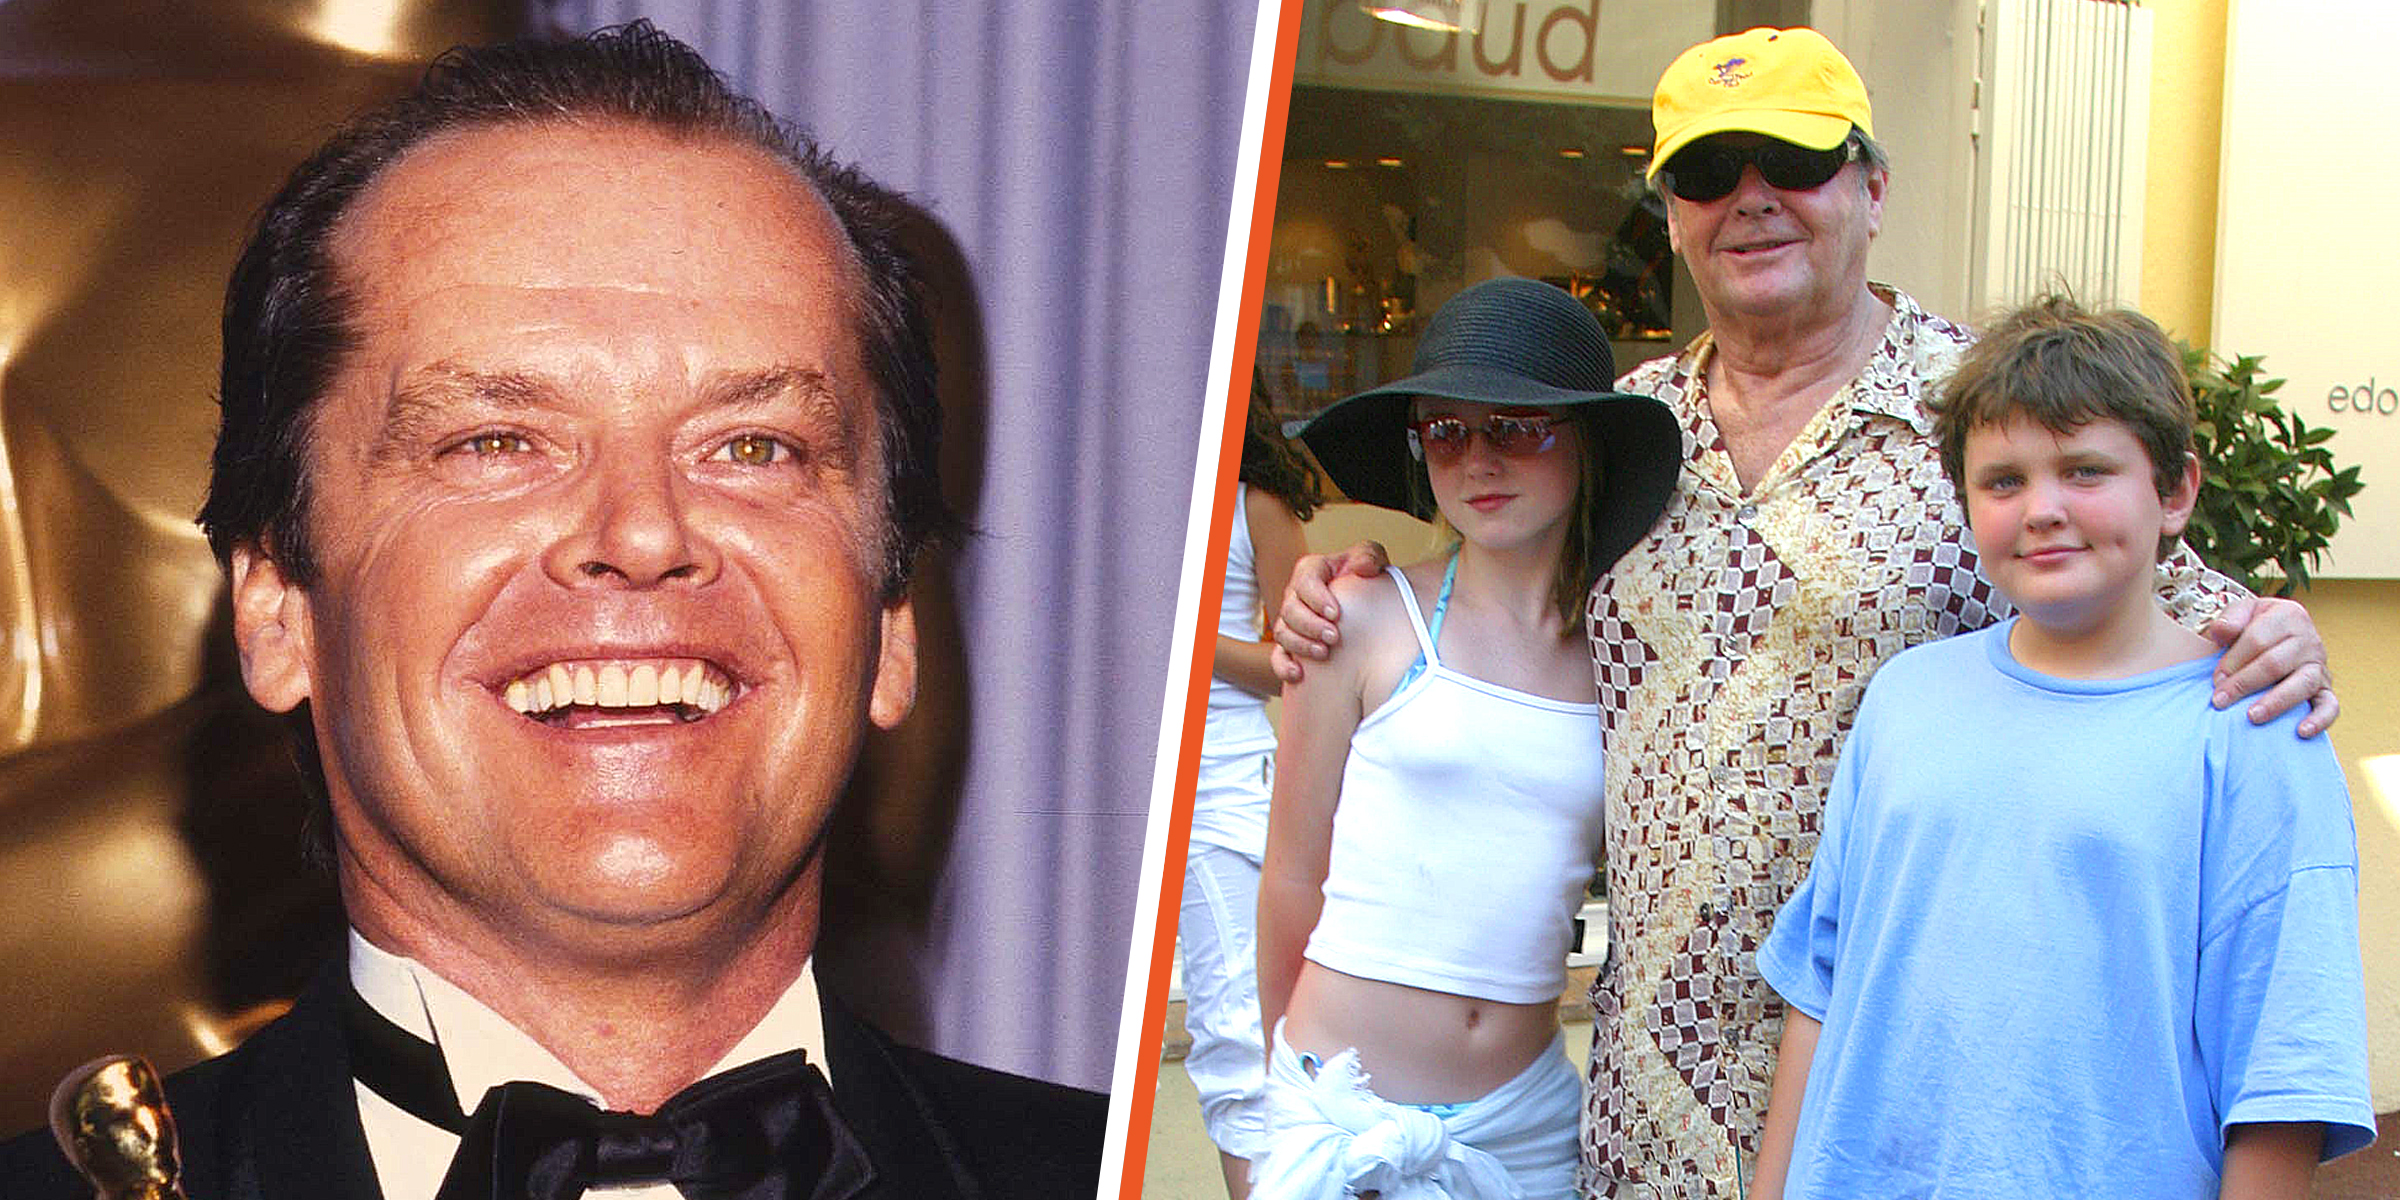 Jack Nicholson and his kids Lorraine and Raymond | Source: Getty Images